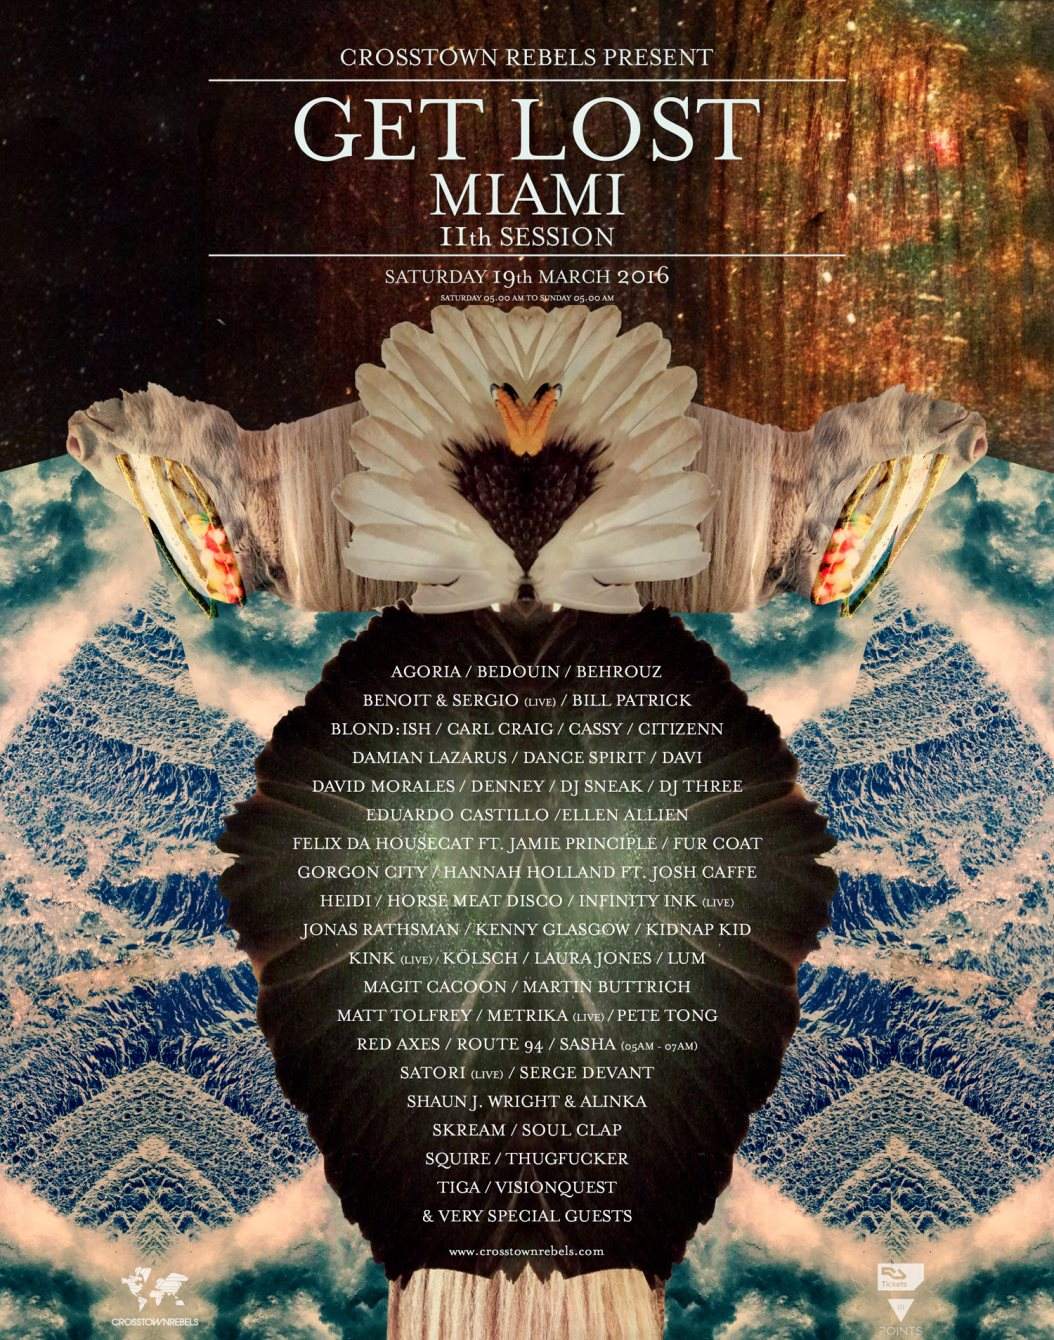 Crosstown Rebels present Get Lost Miami - 11th Session - フライヤー表